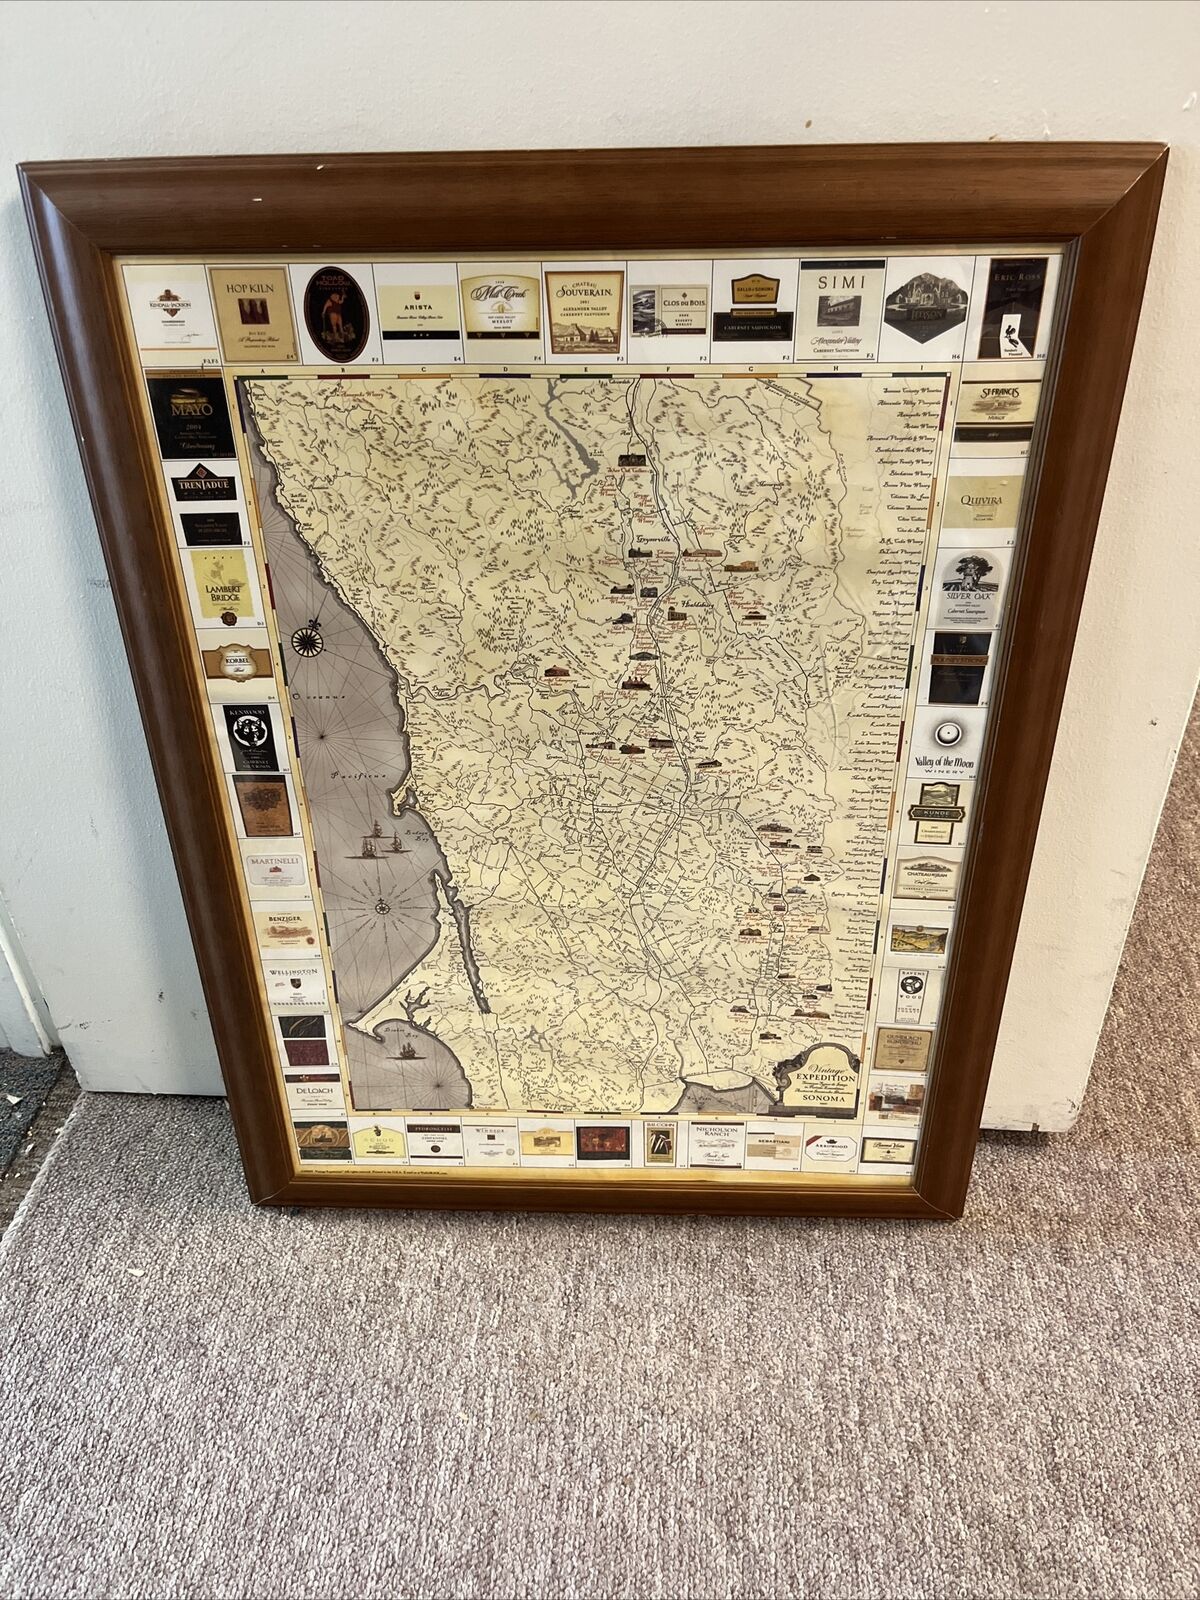 Framed Vintage Expedition Sonoma California Winery Trail Map 2005 MMV Wine